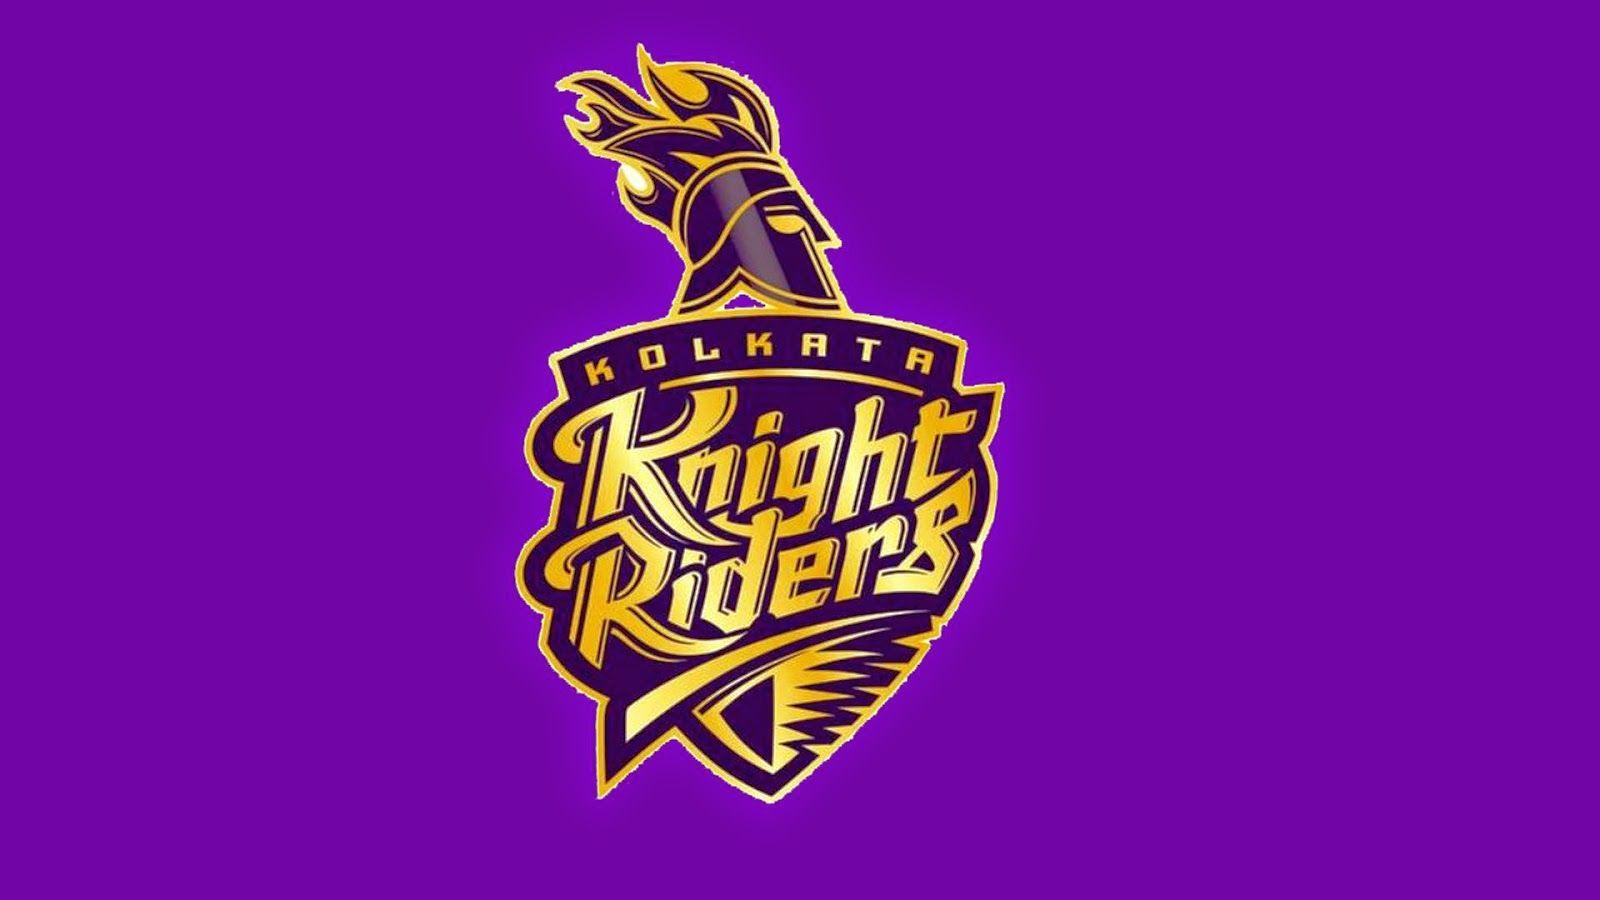 Ipl Logo Png Transparent Images - Ipl Cricket Teams Logo,What Is The  Official Icon Of Chennai Super Kings Team - free transparent png images -  pngaaa.com